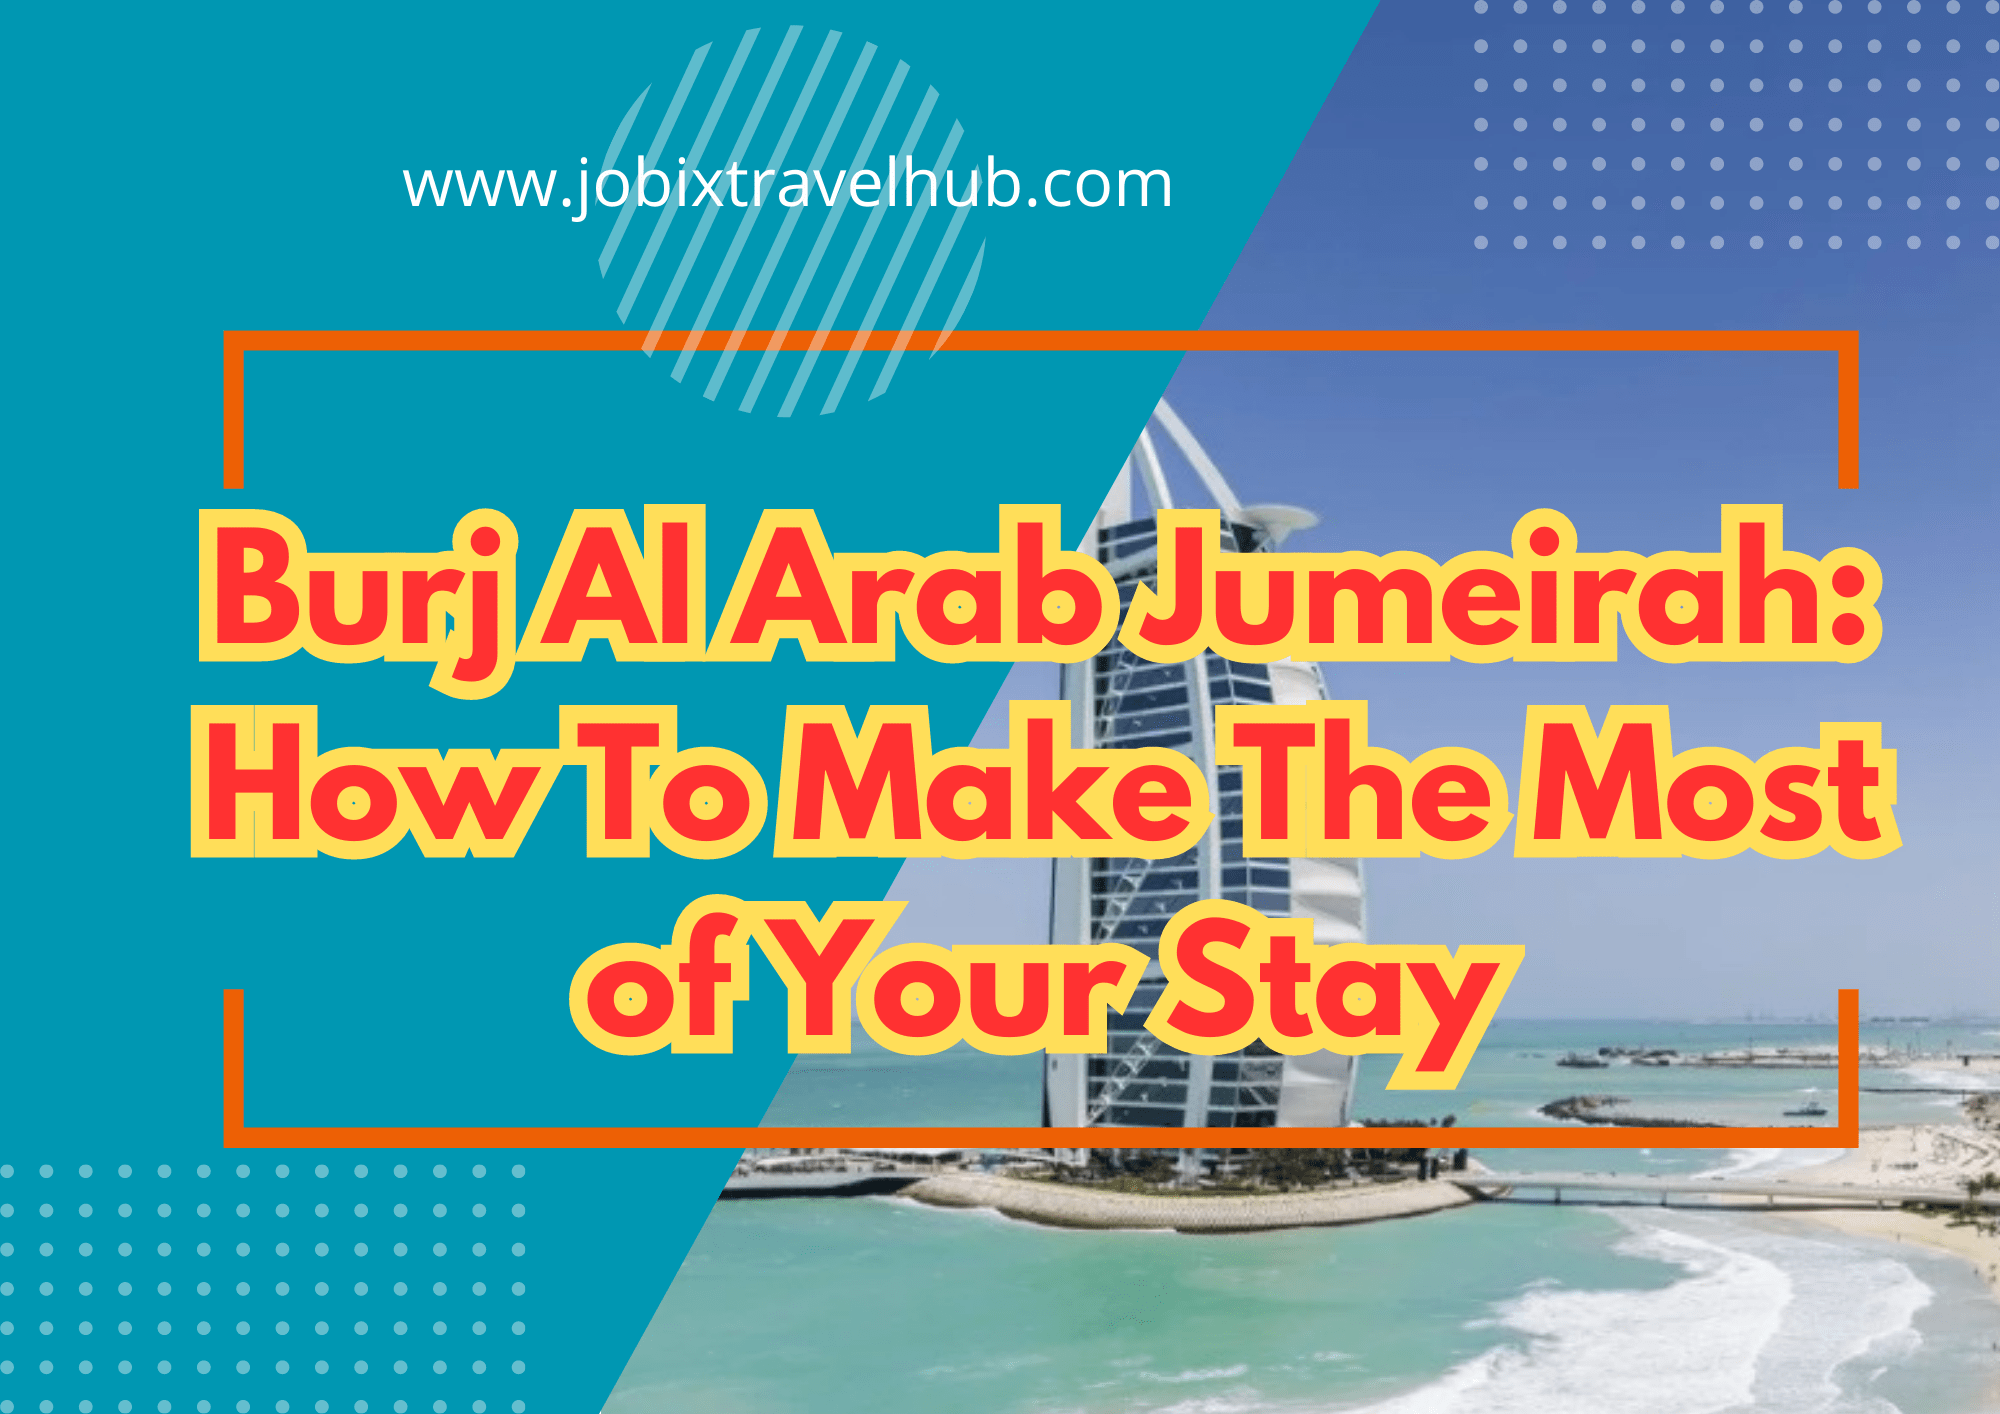 Are you looking for a rich and luxurious experience that can take your vacation to the next level? You don't need to search anywhere else. We'll walk you to Burj al-Arab in Jumeirah, Dubai, and show you how to enjoy its exclusive benefits.